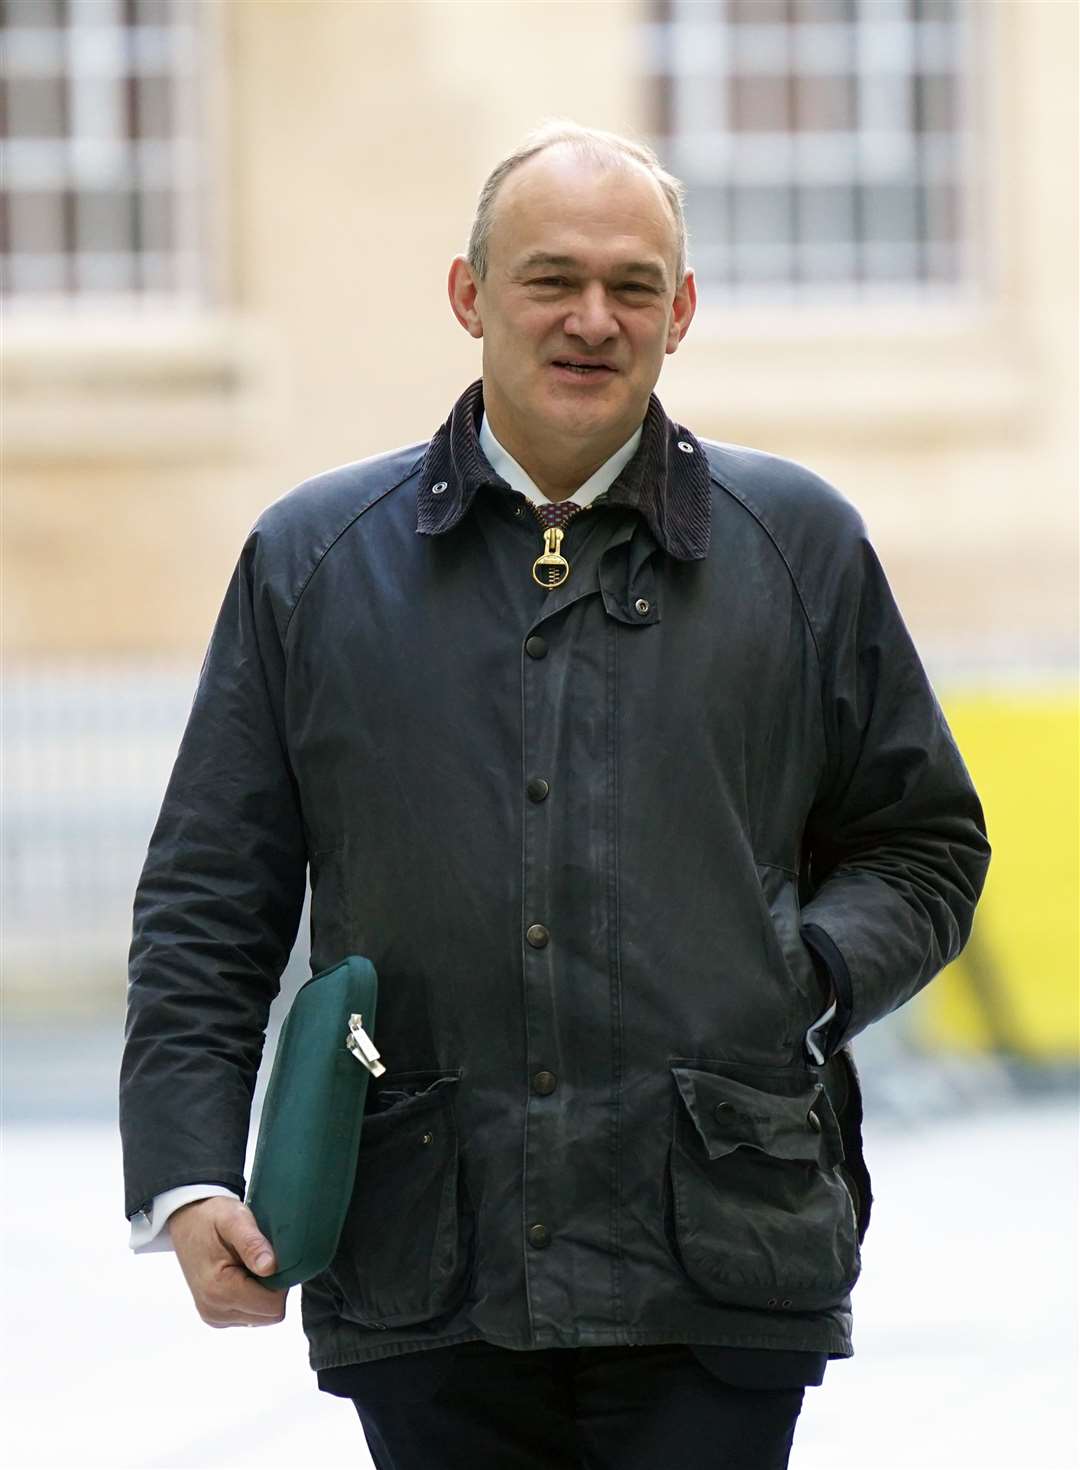 Sir Ed Davey will give evidence at the Post Office Horizon IT Inquiry when it resumes in April (Yui Mok/PA)